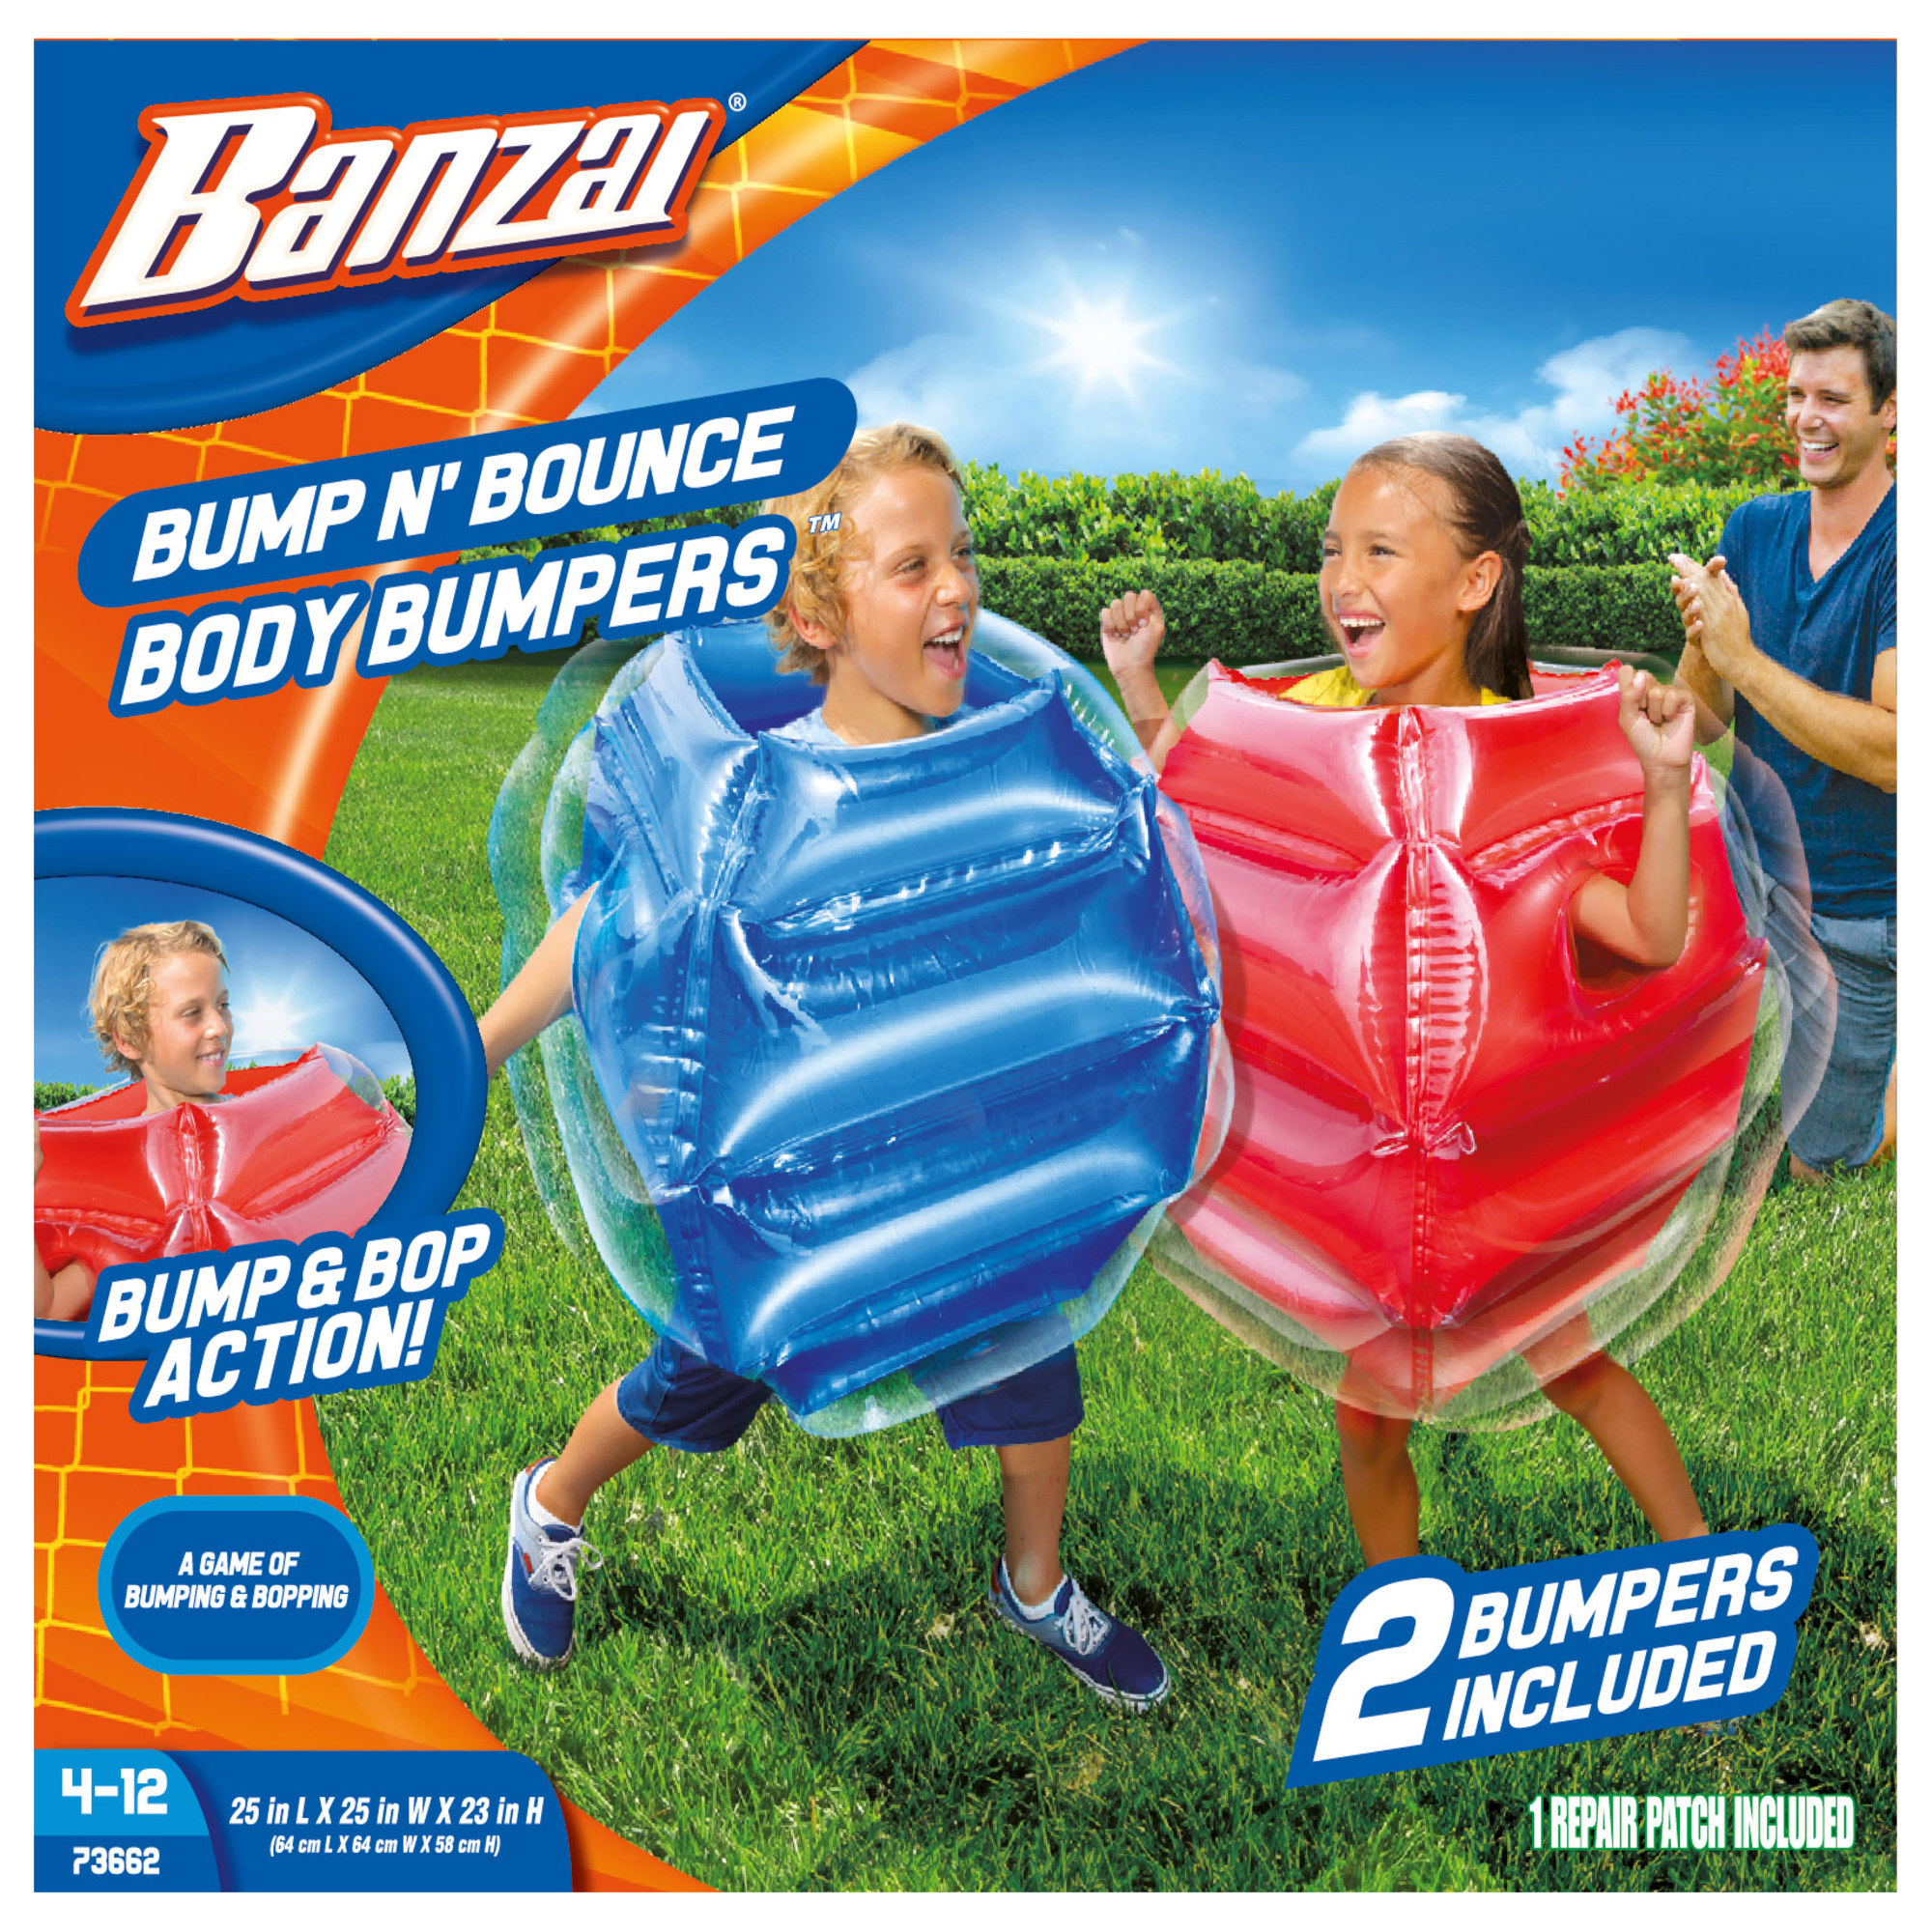 Banzai Bump N Bounce Plastic Body Bumpers in Red & Blue, 2 Bumpers, Kids Toy, 4+ - image 1 of 3